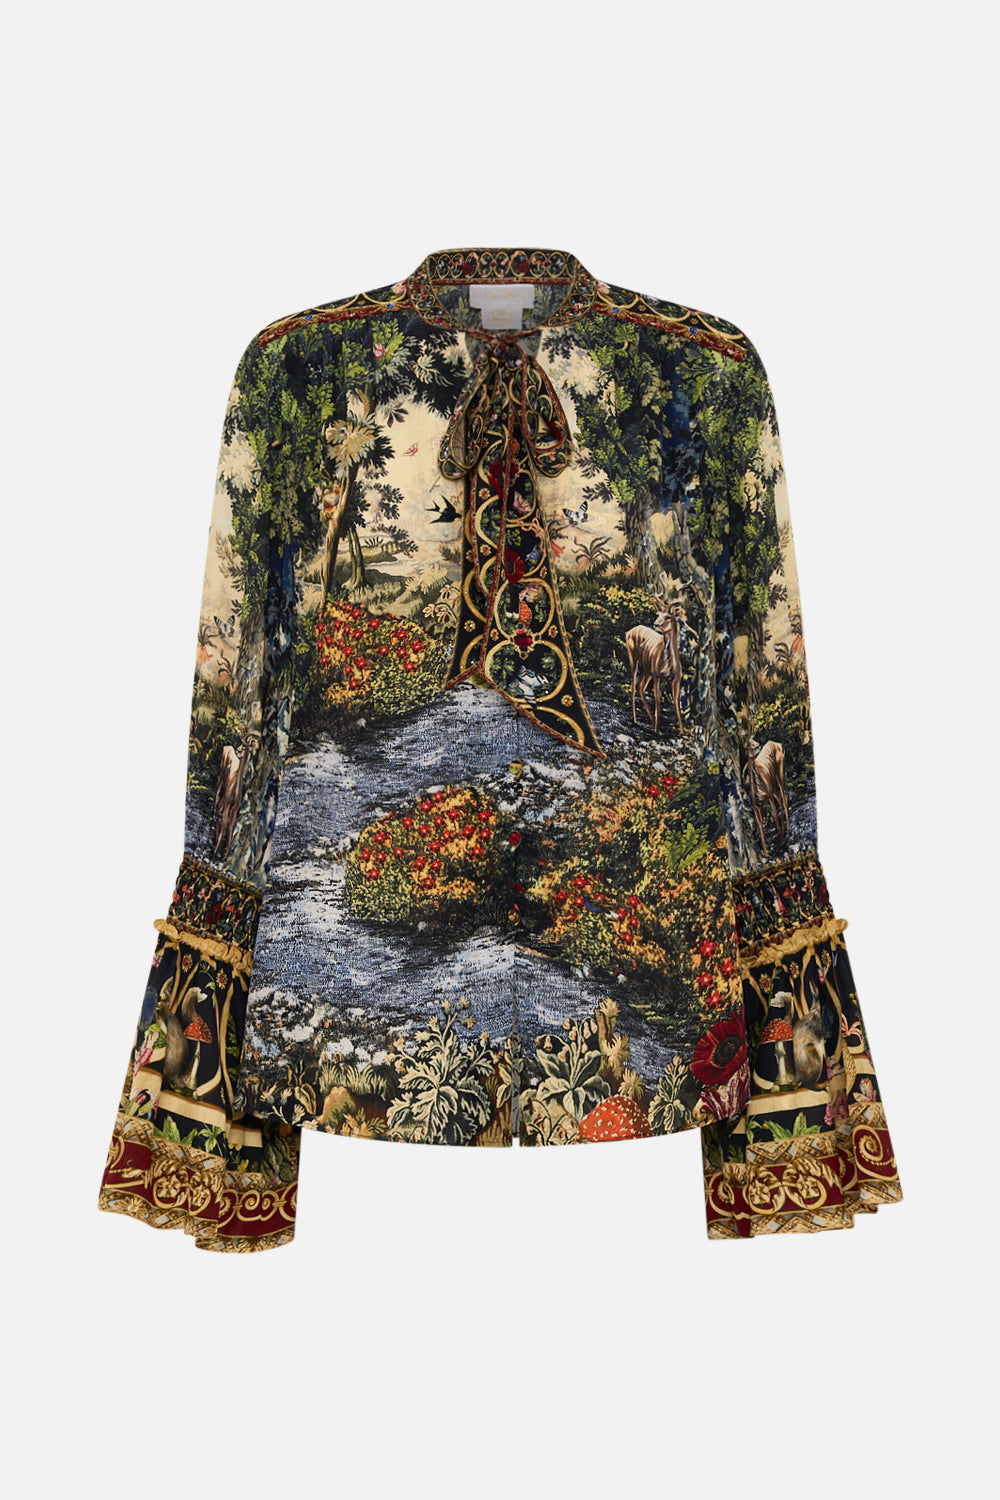 CAMILLA Black Elastic Sleeve Tie Front Blouse in Tapestry Totems print